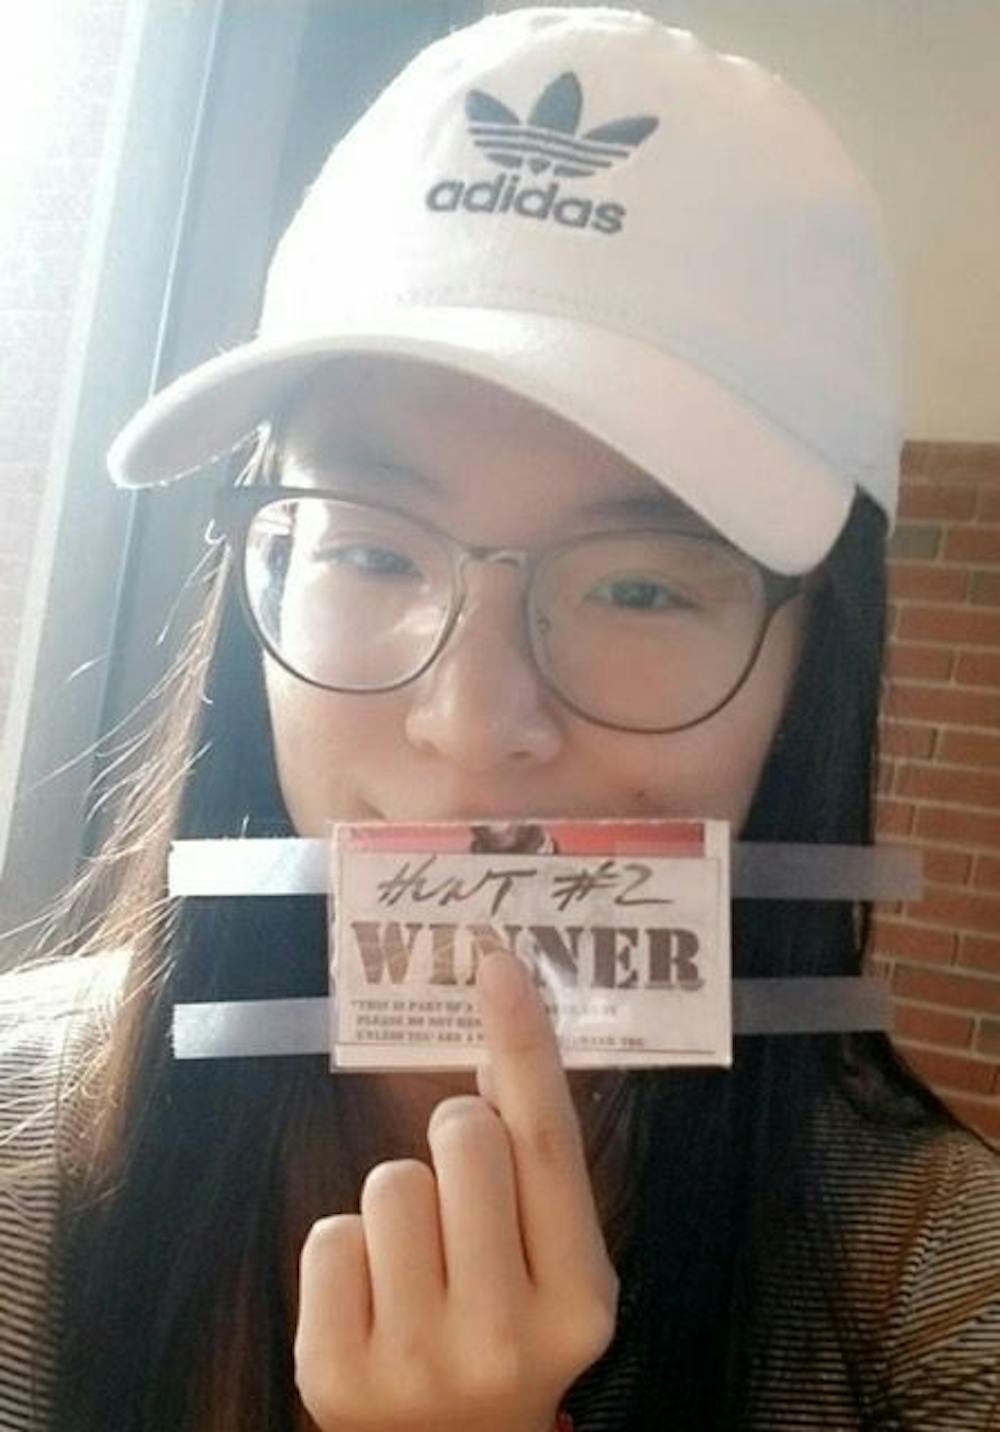 <p>Sherry Kao, a UF biology sophomore, participated in Mini Treasure Hunts around the UF campus, a Facebook page that advertises small-scale scavenger hunts. Kao, 19, won the second hunt Feb. 20.</p>